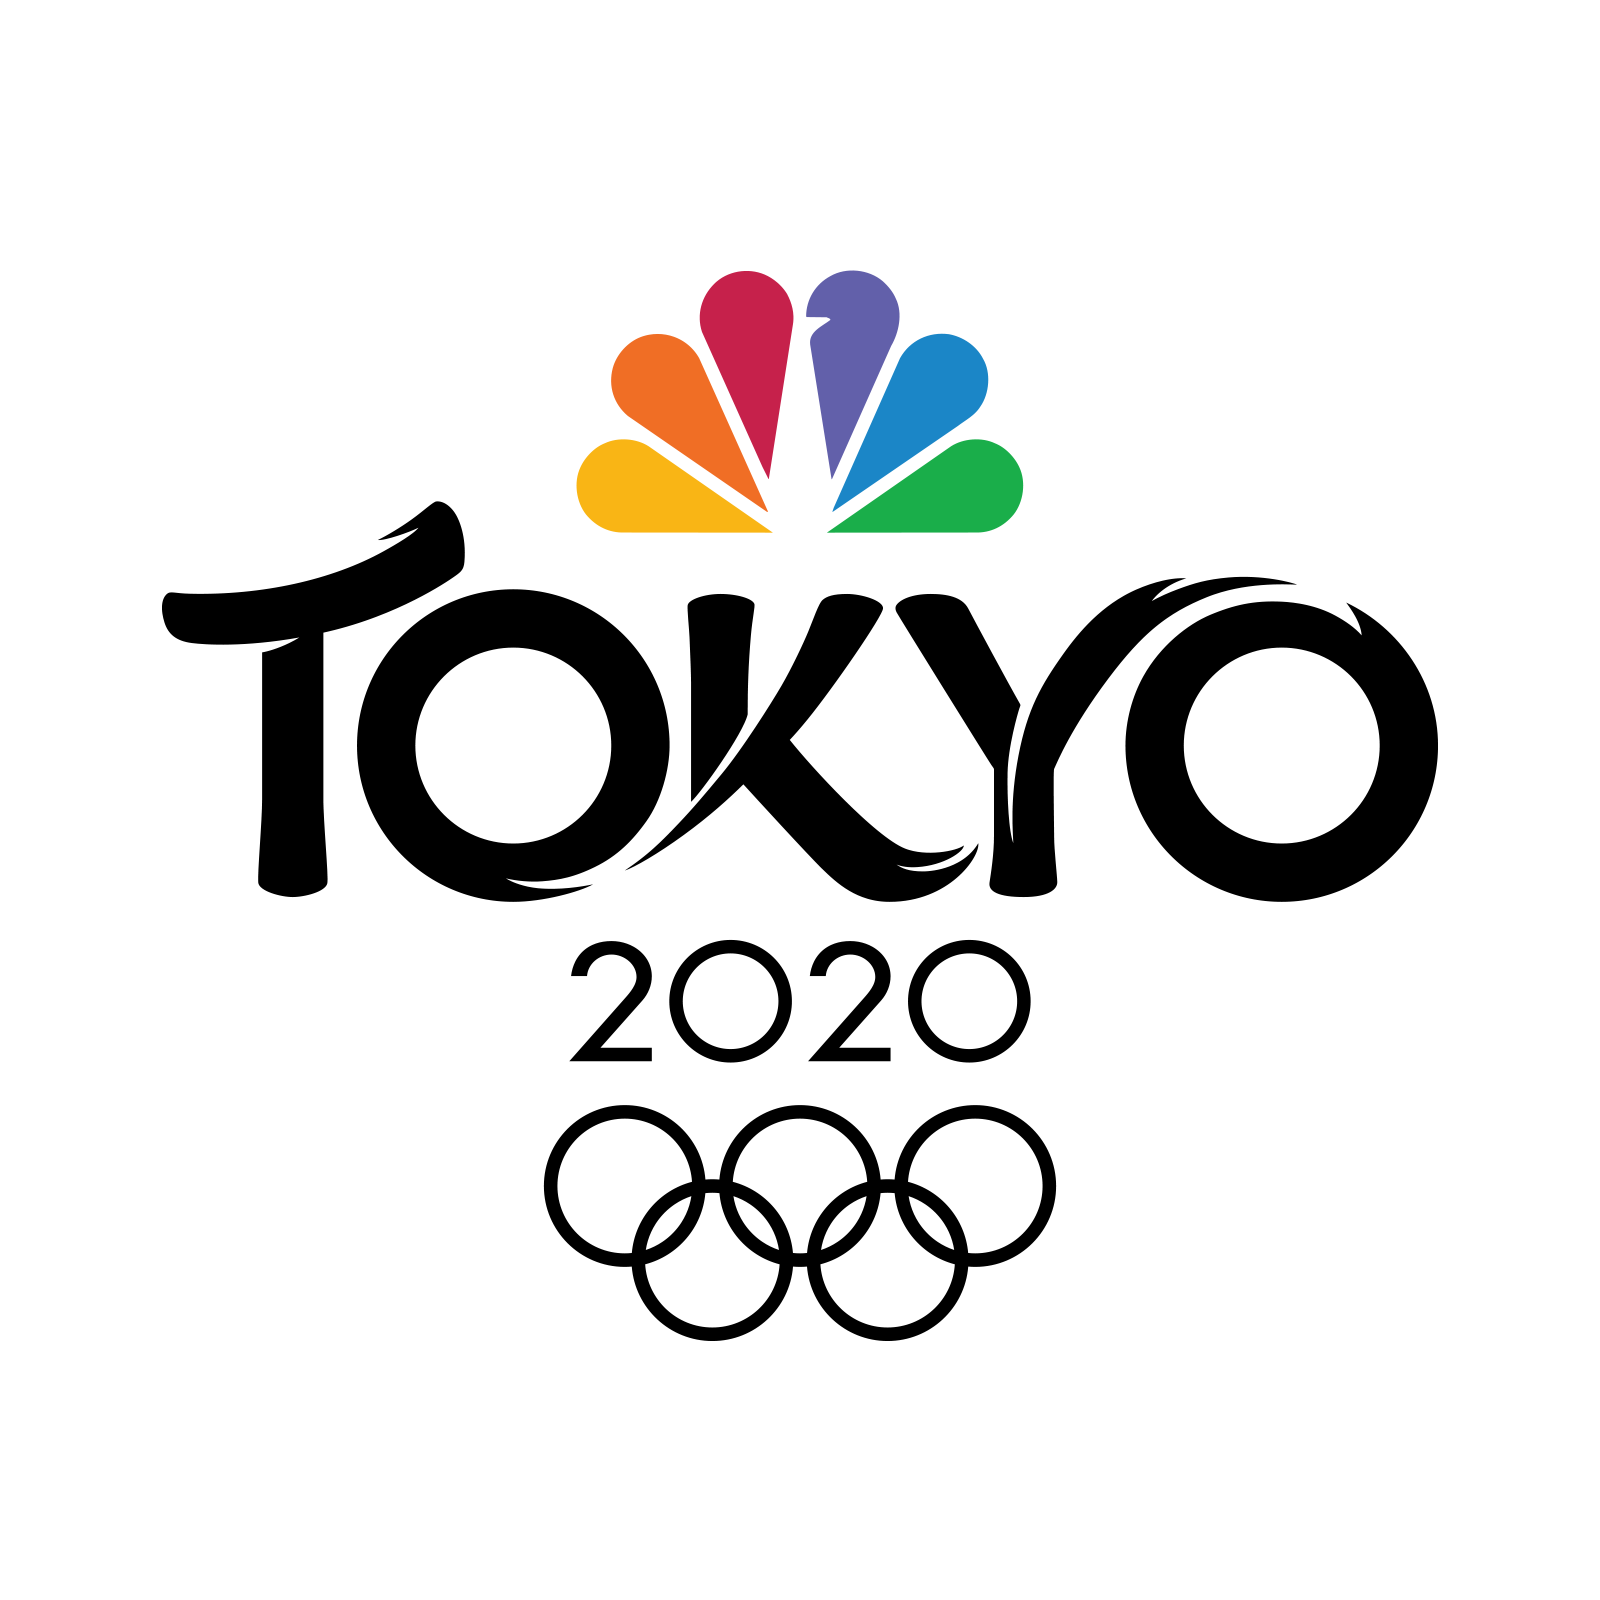 NBCUniversal reveal advertising sales have surpassed $1 billion for Tokyo 2020 